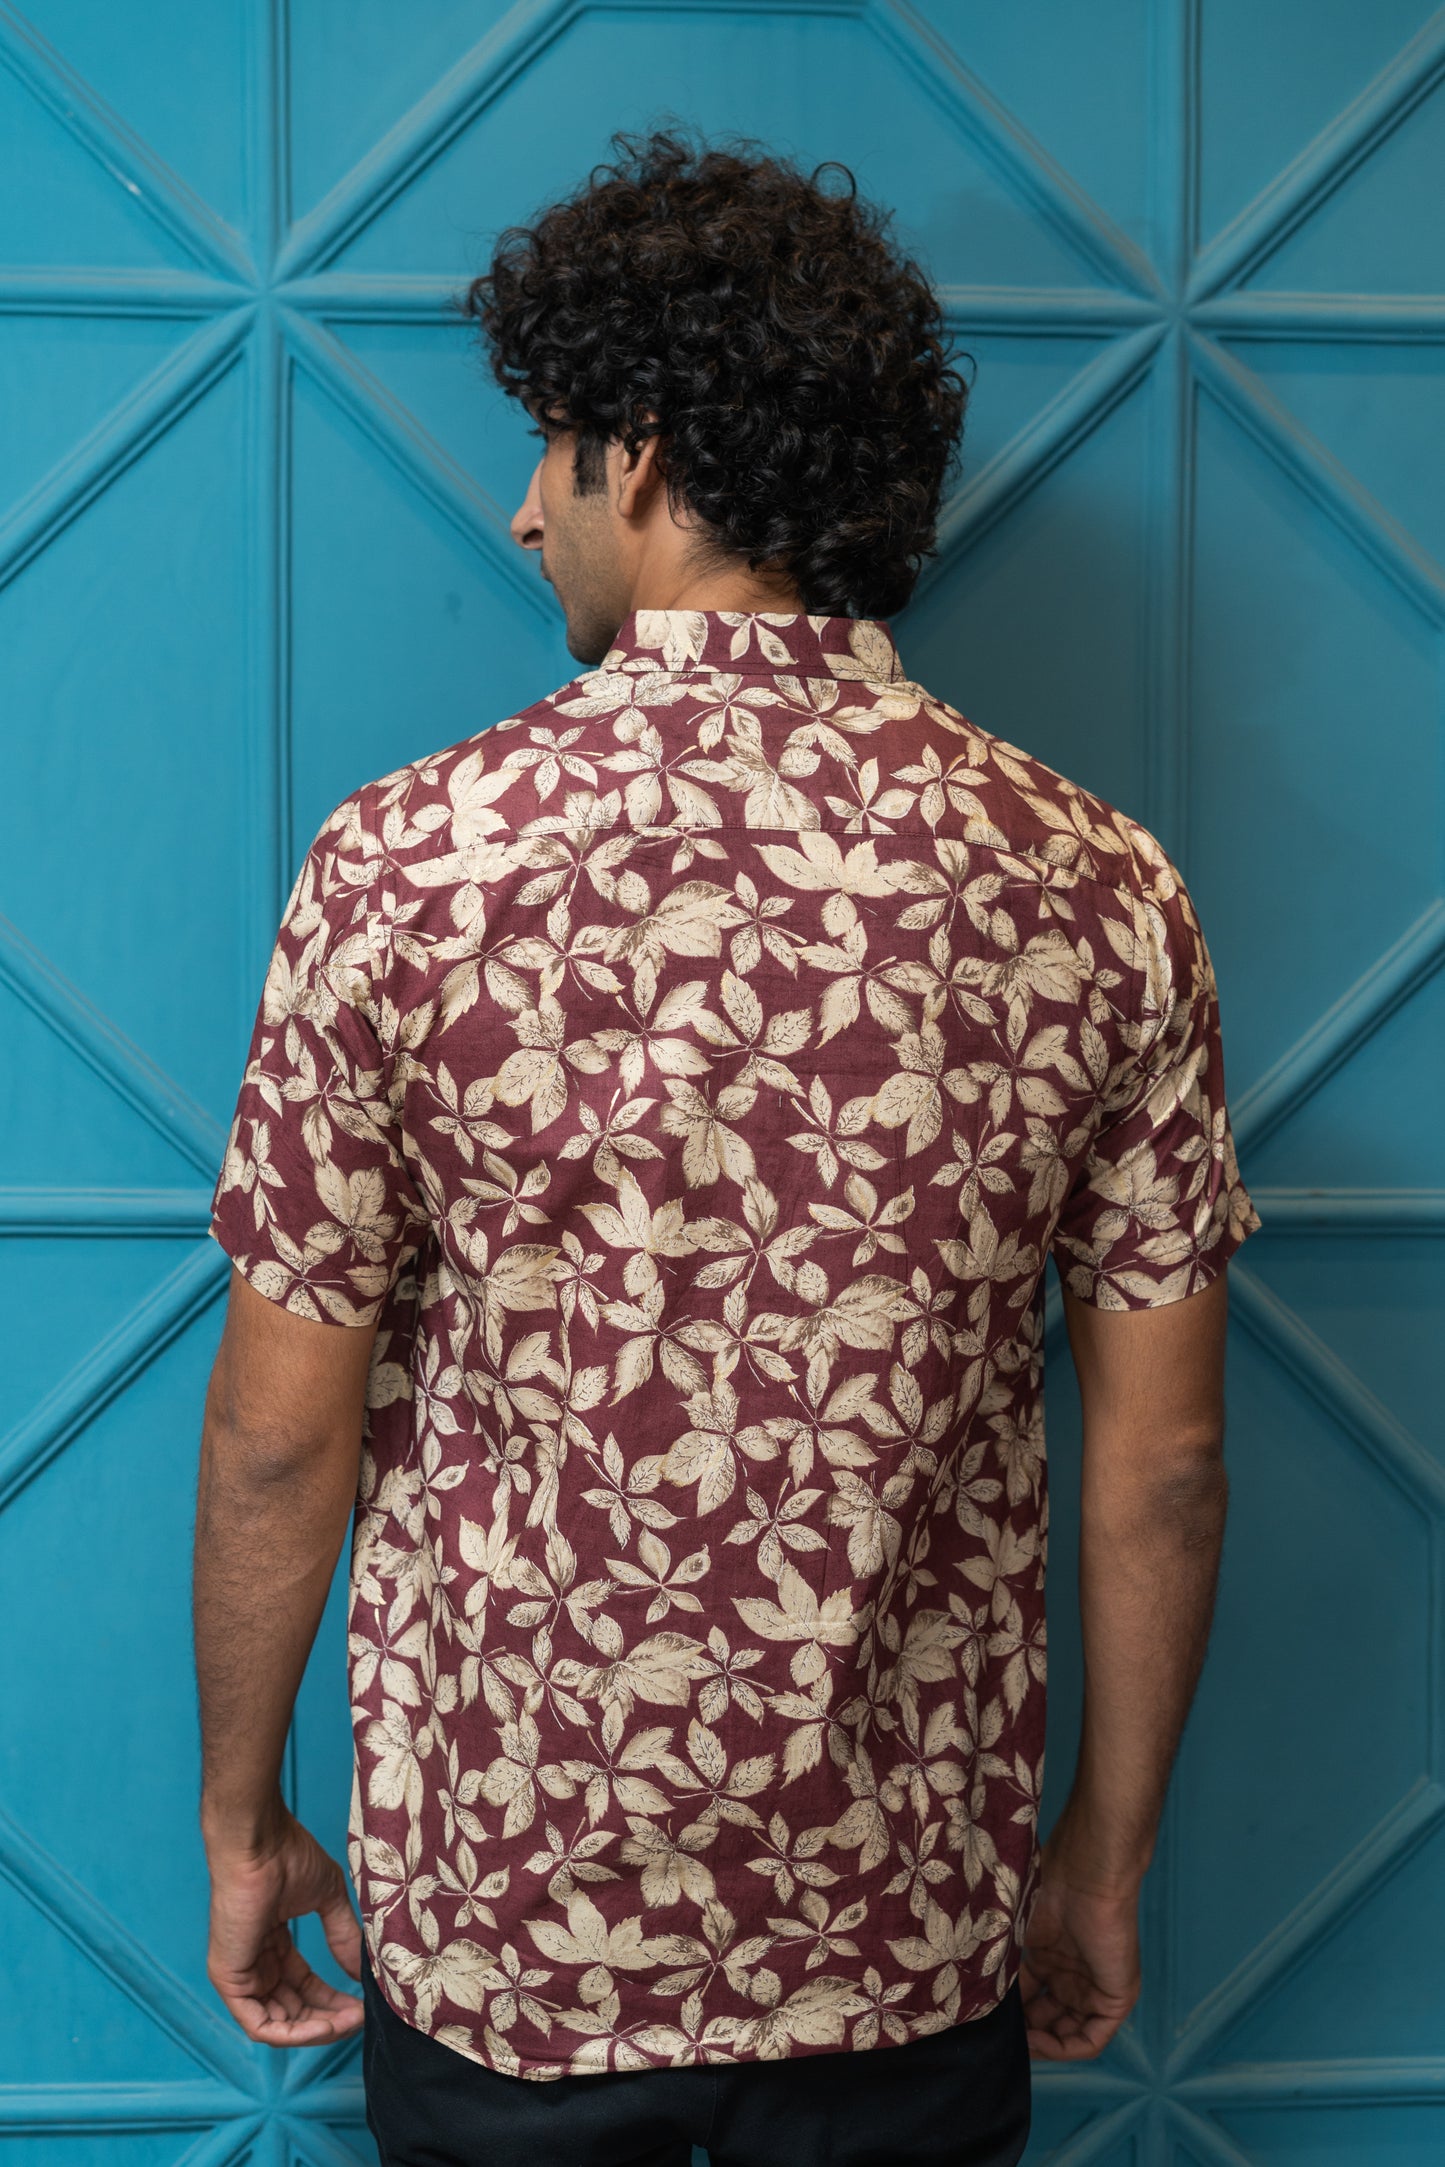 The Maroon All-Over Floral Foil Print Half Sleeves Shirt